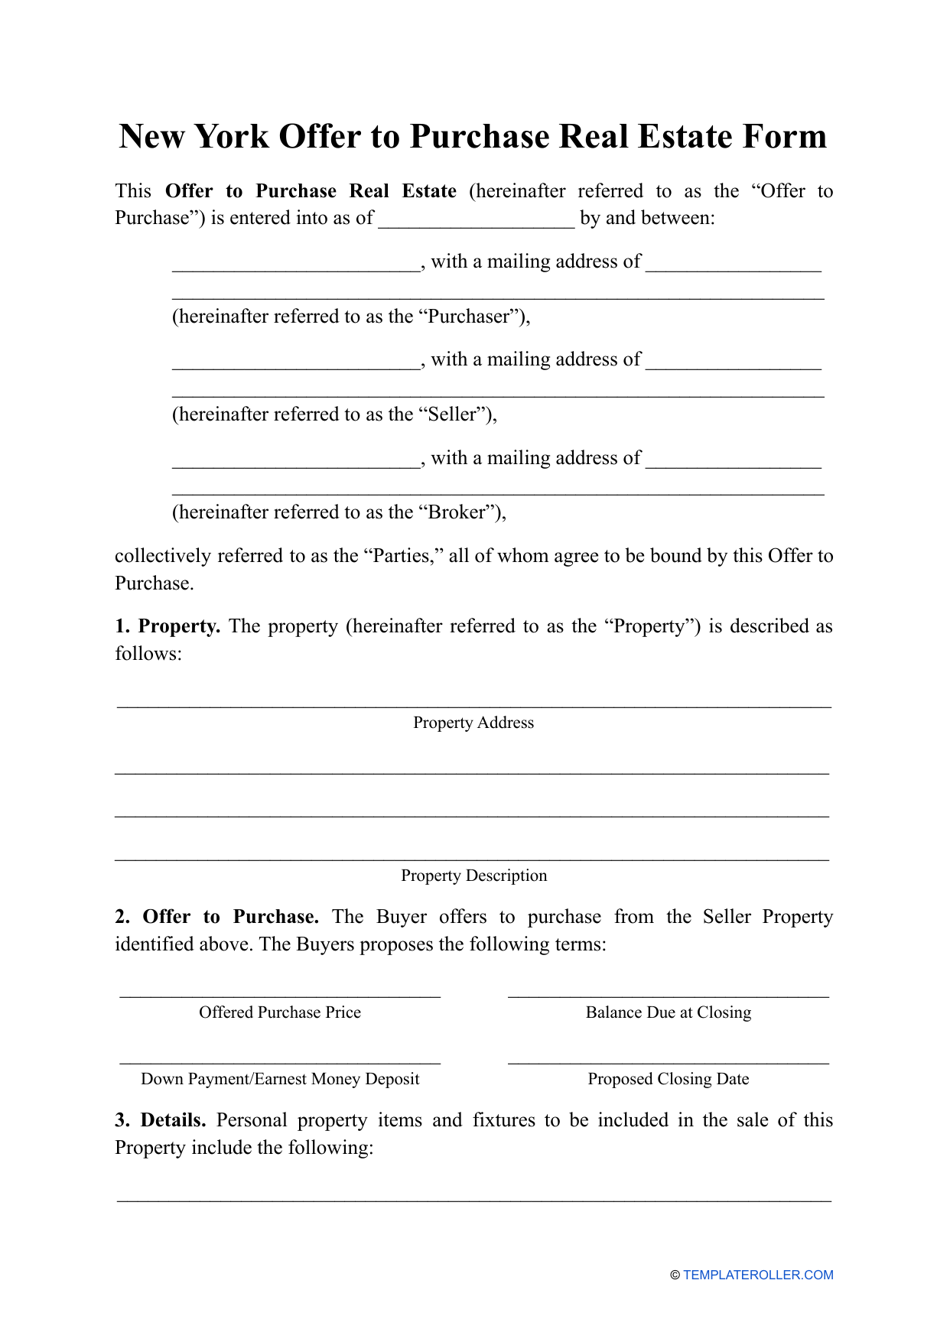 Offer to Purchase Real Estate Form - New York, Page 1